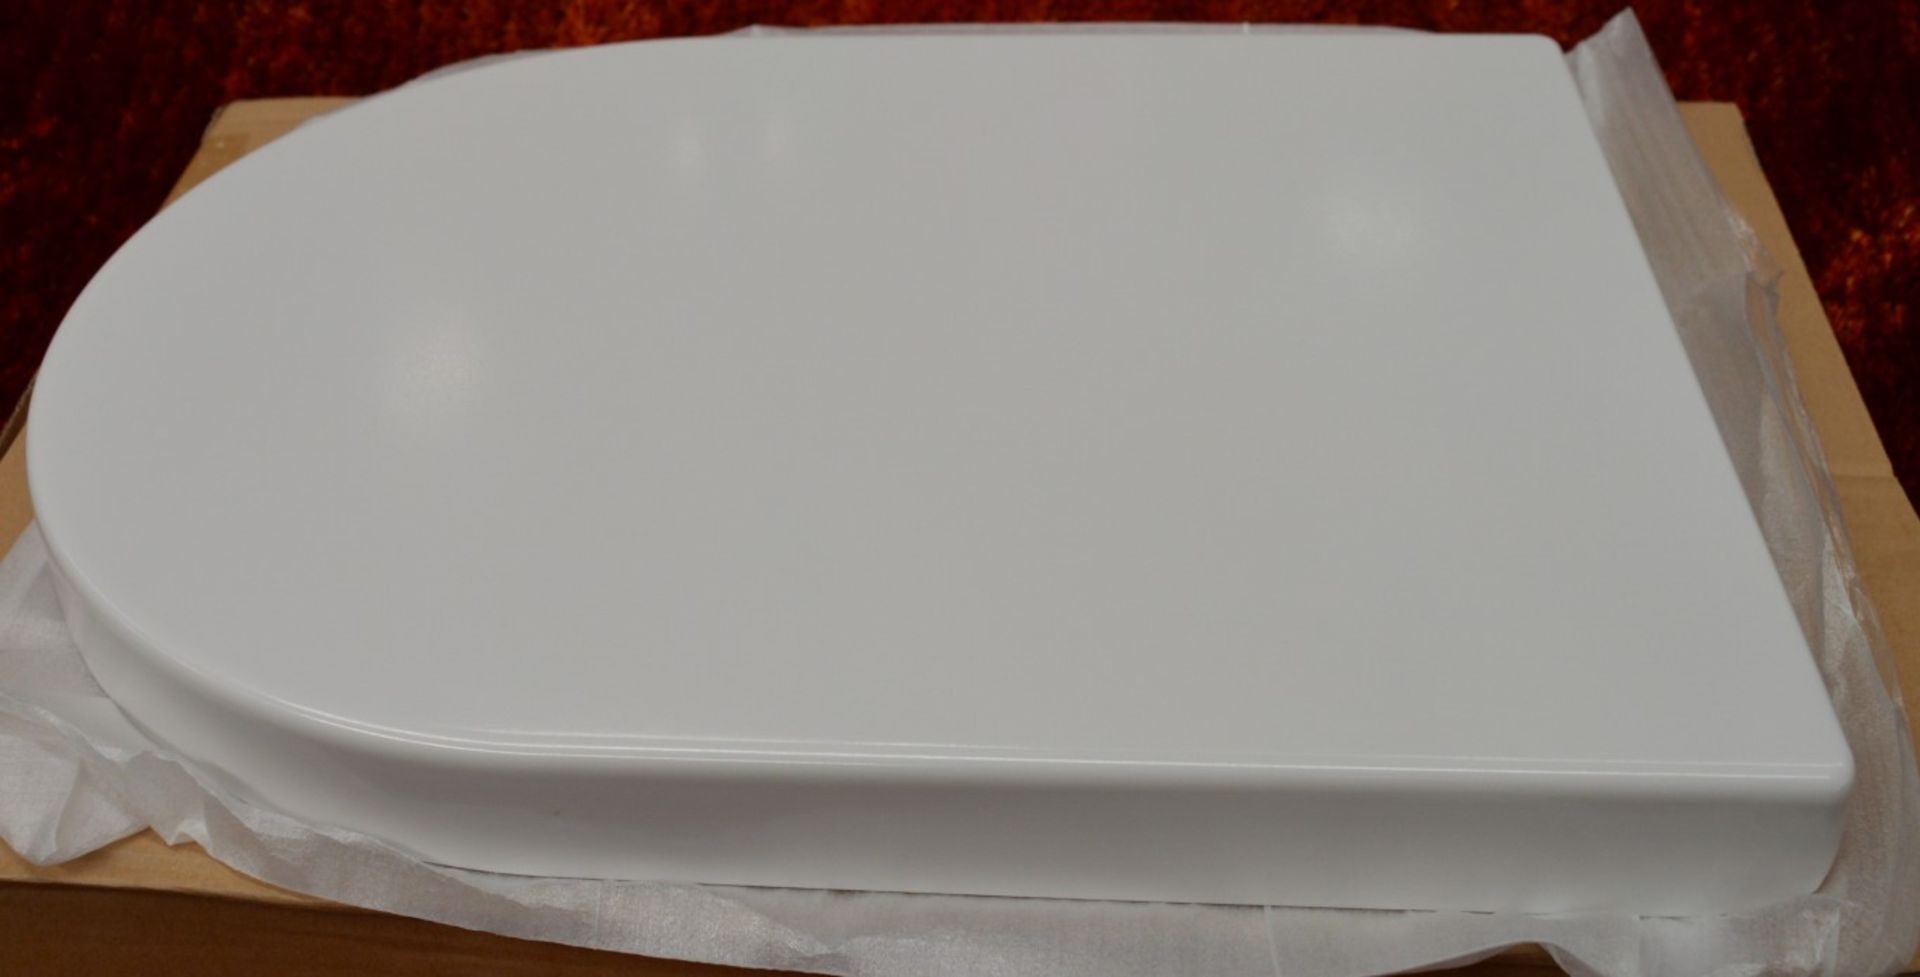 1 x Vogue Cosmos Modern White Soft Close Toilet Seat and Cover Top Fixing - Brand New Boxed - Image 4 of 7